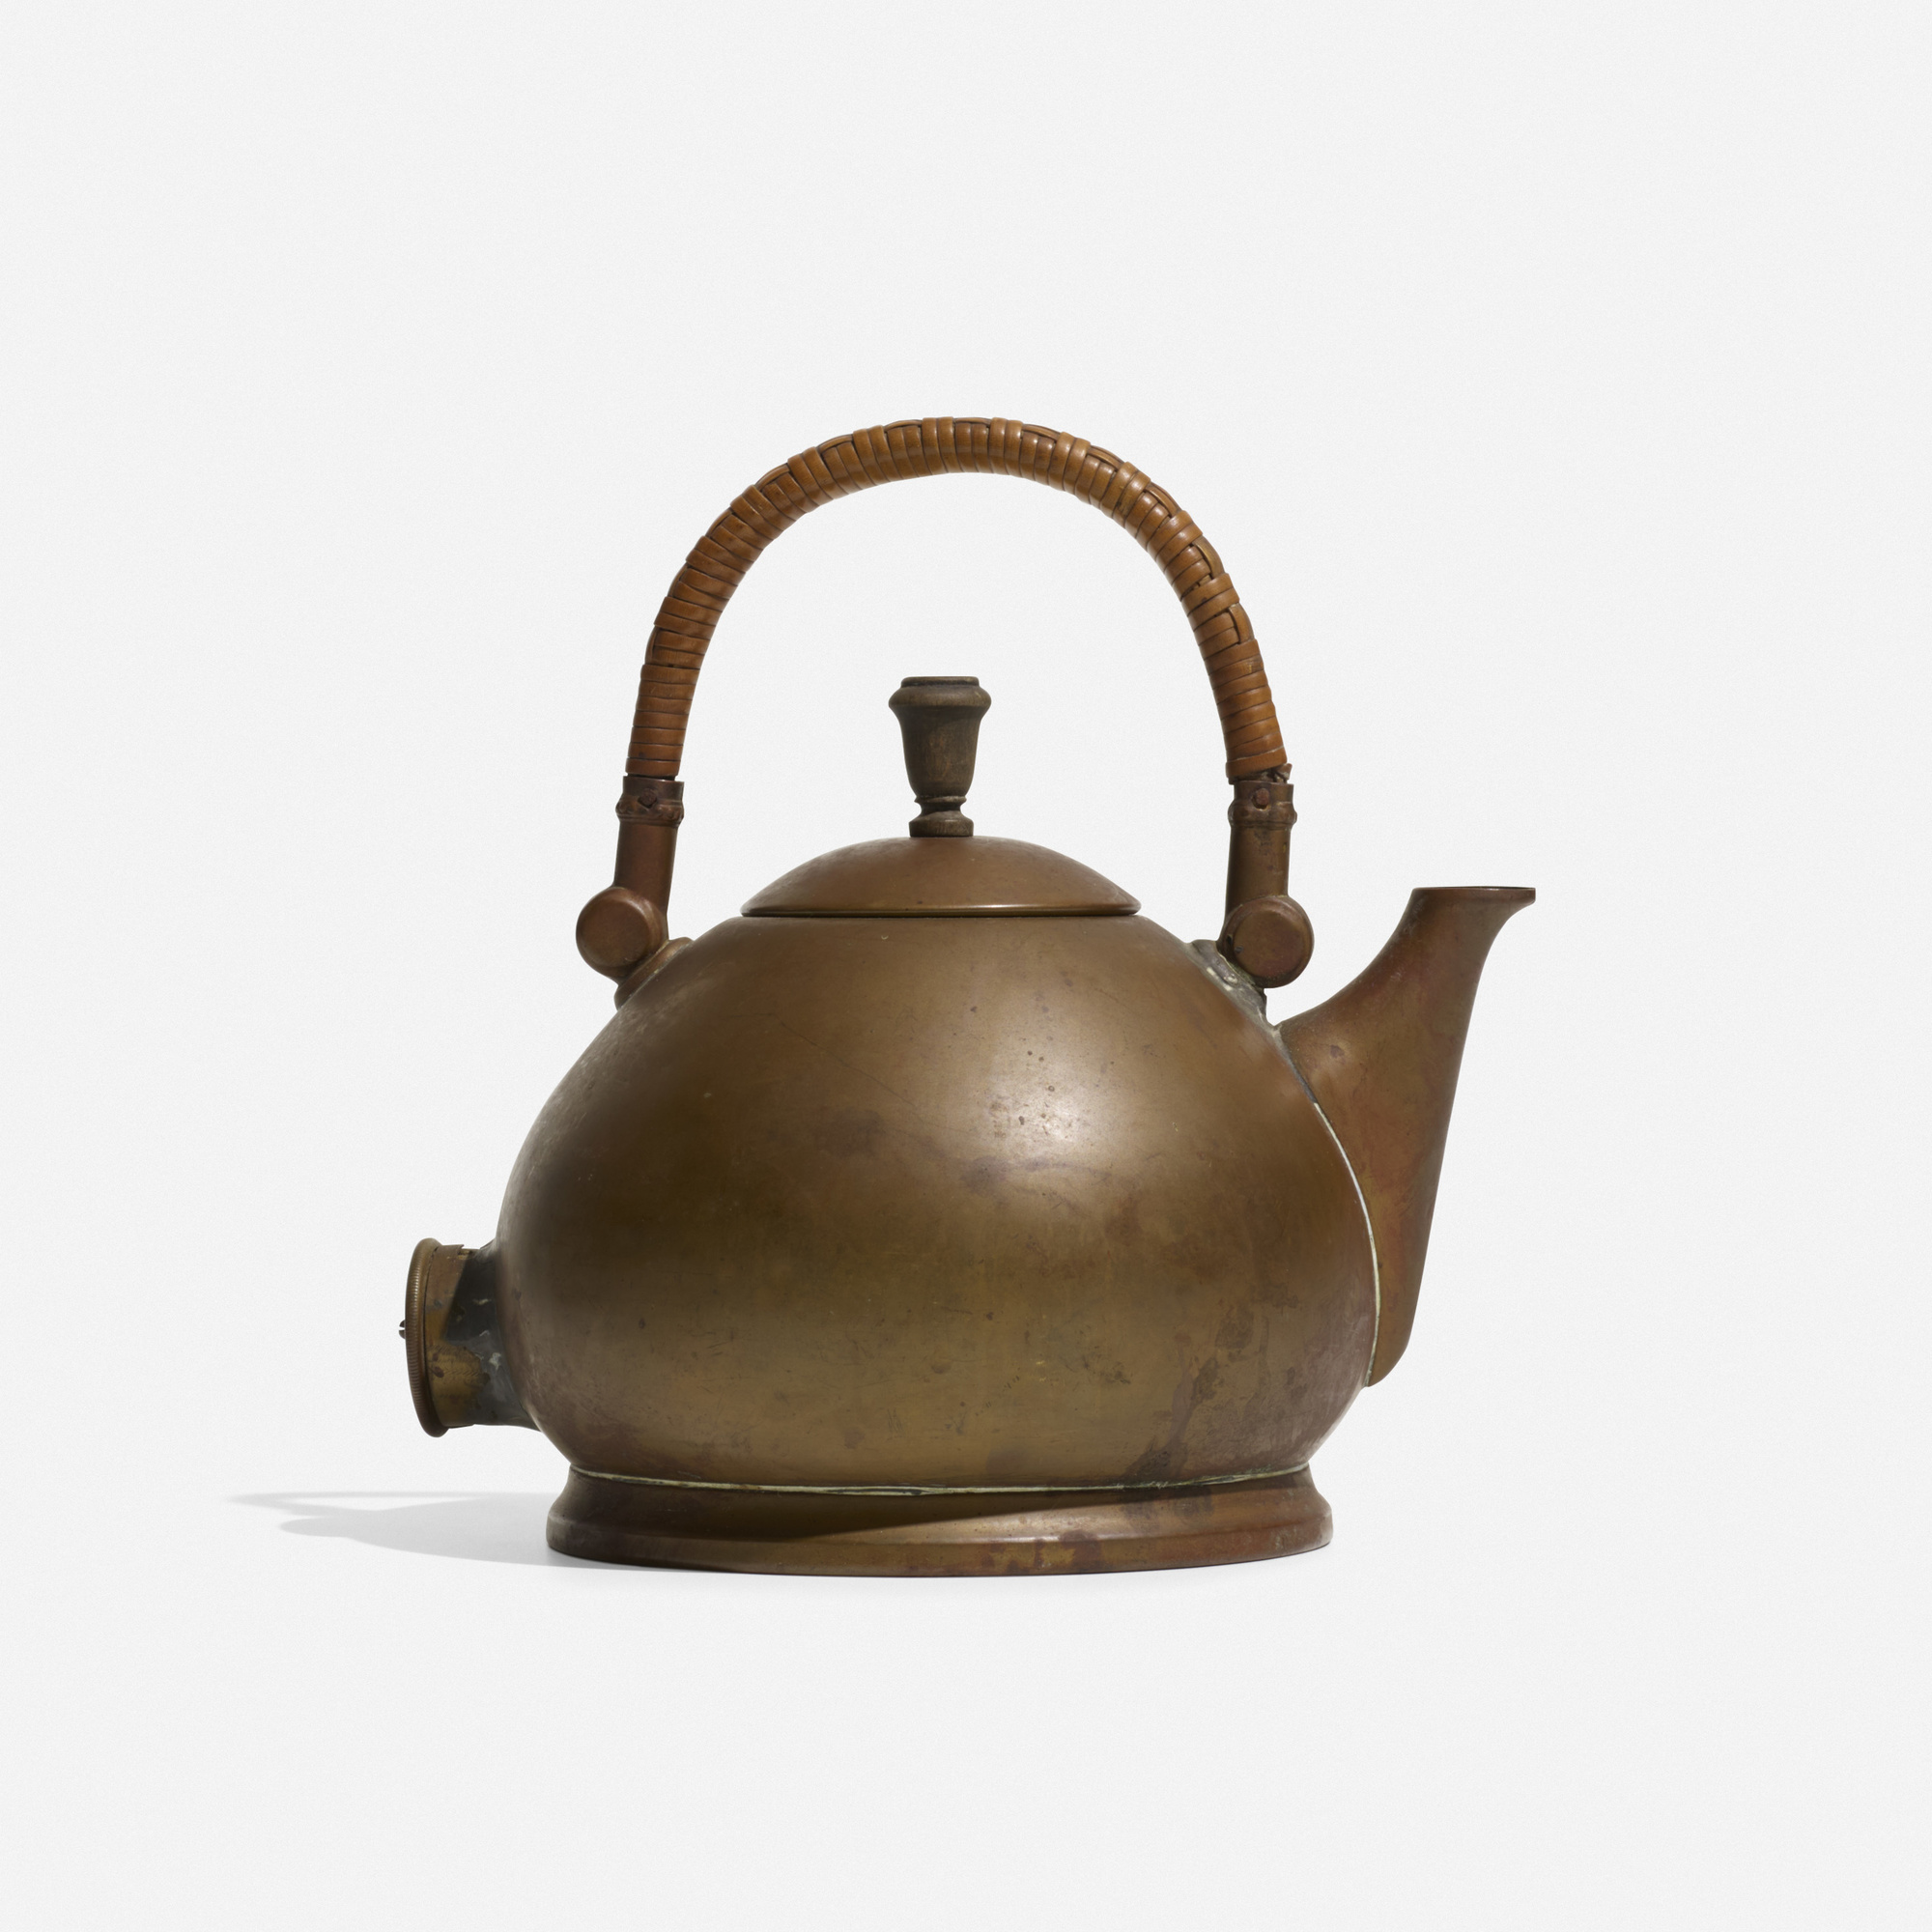 142_1_the_boyd_collection_iii_life_of_design_november_2018_peter_behrens_electric_tea_kettle__wright_auction.jpg